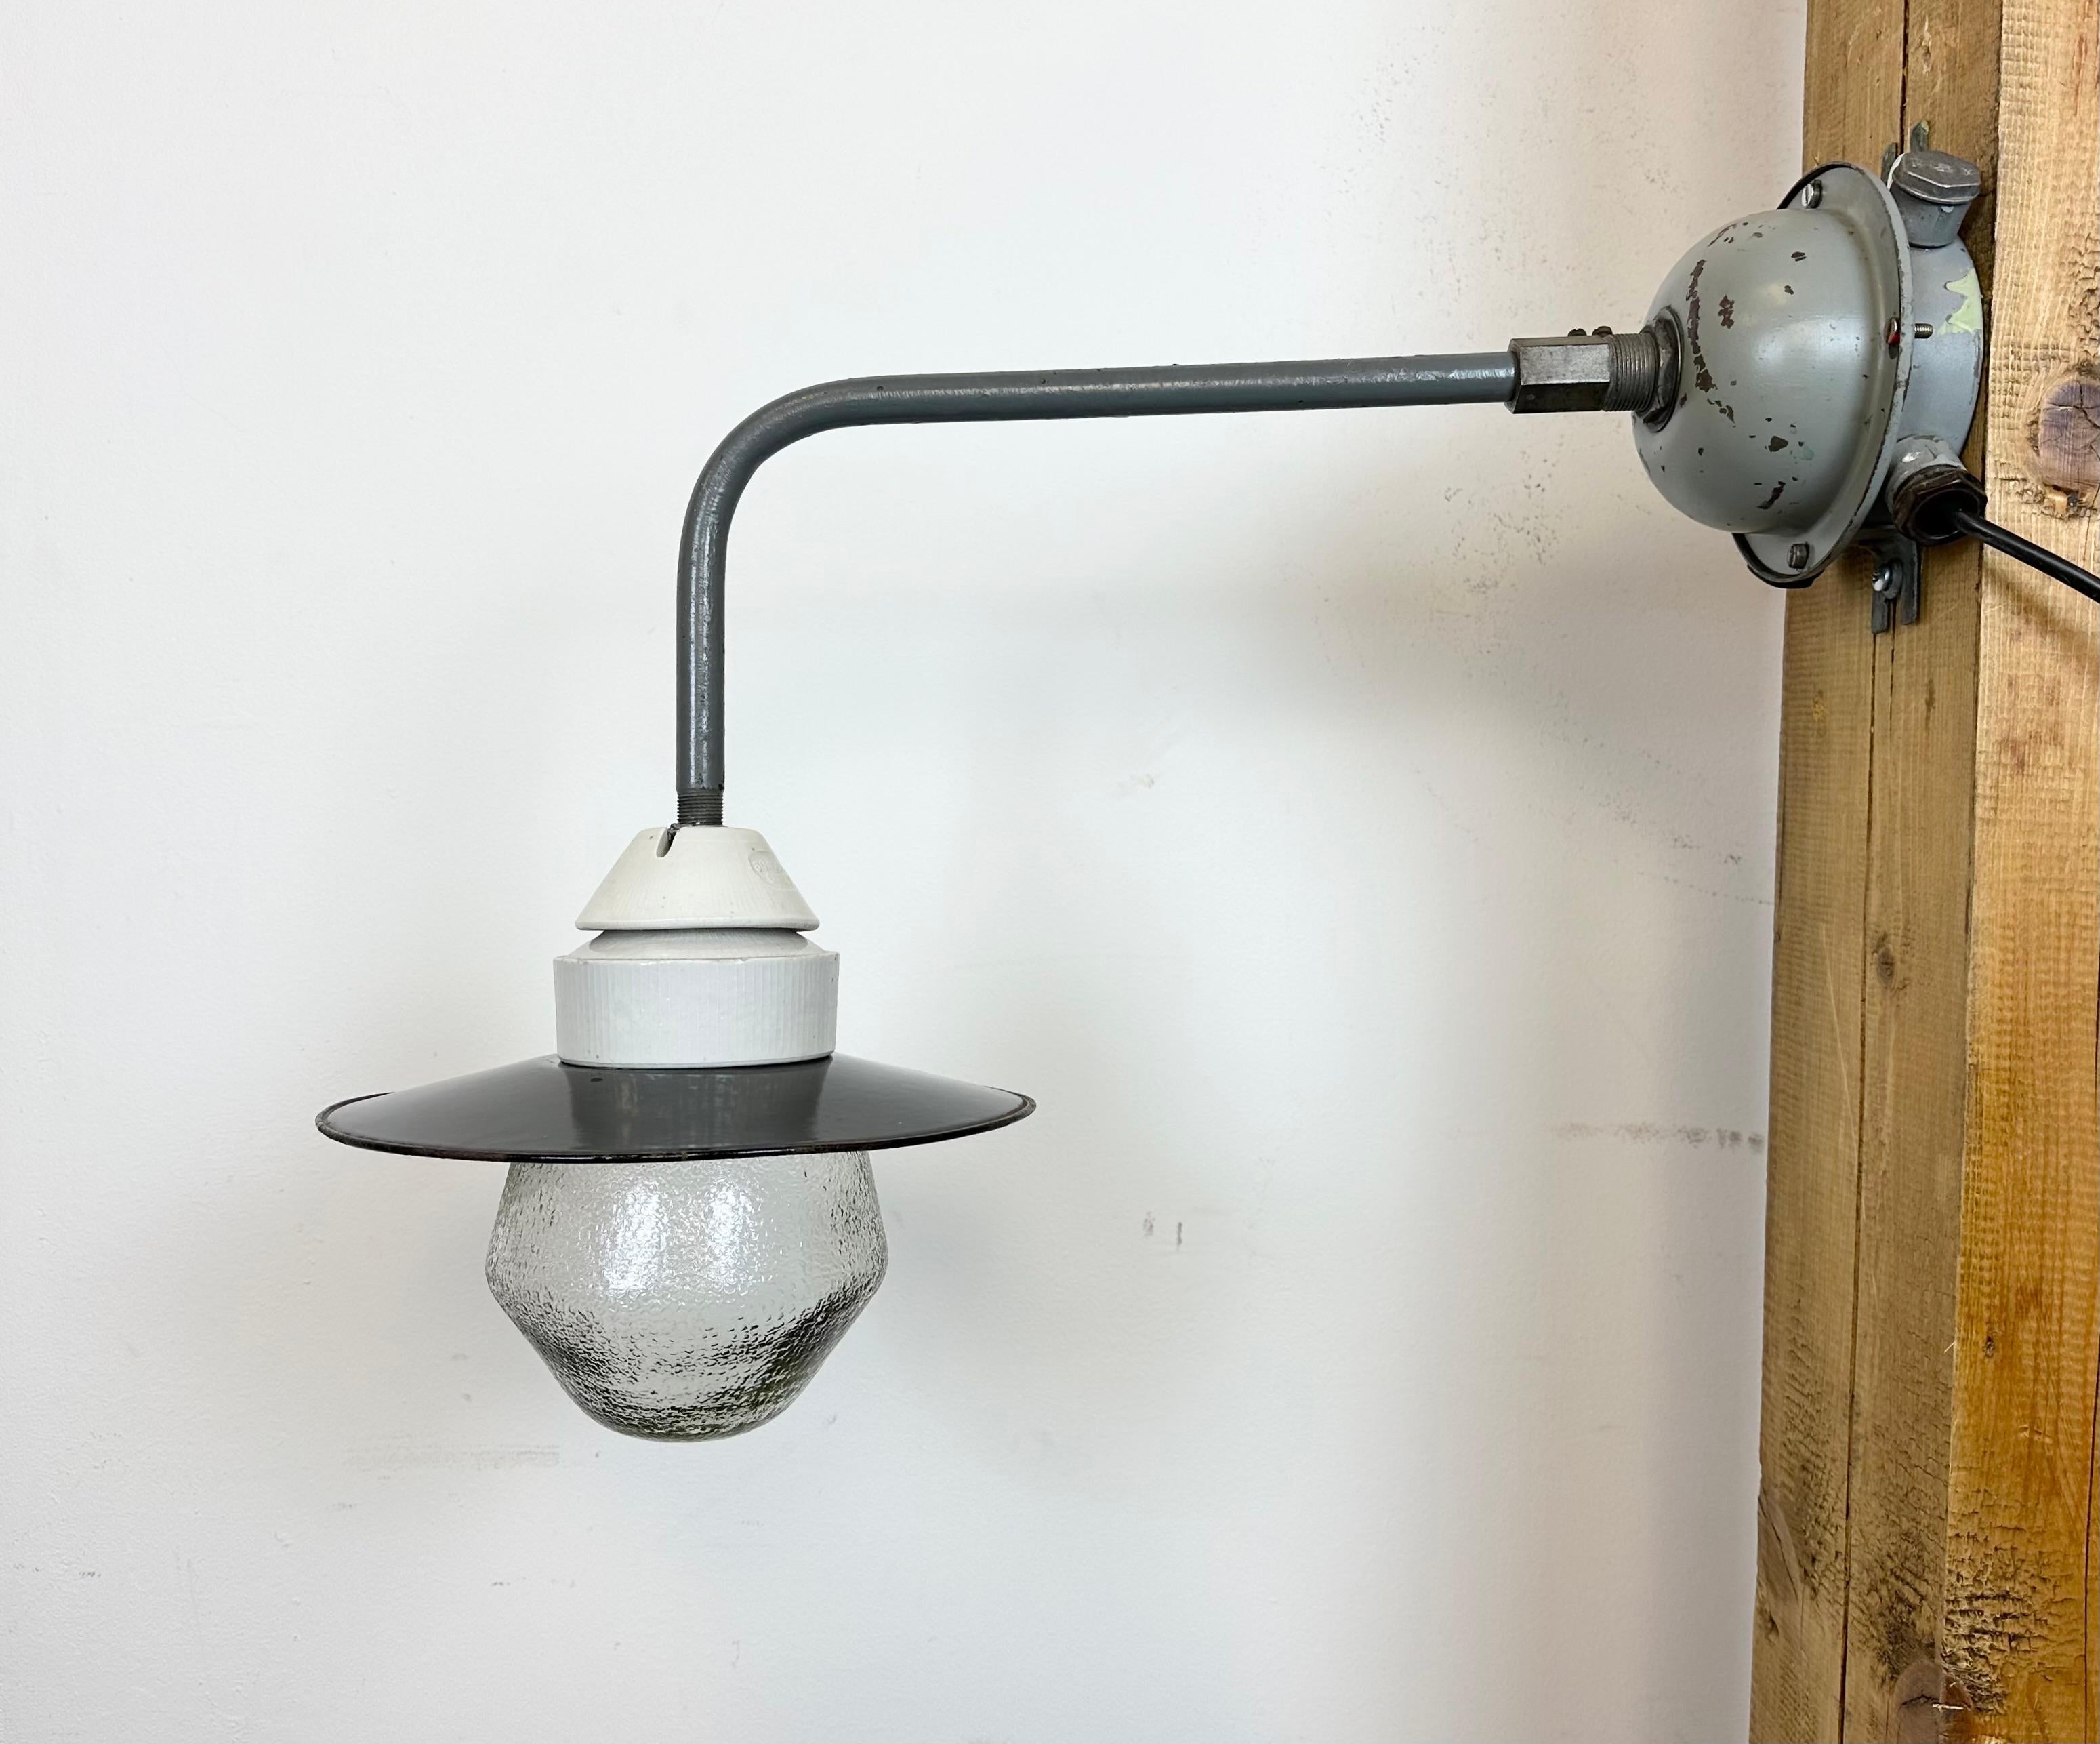 Industrial factory wall light made in Poland during the 1960s. It features a grey iron wall mounting and arm, a black enamel shade with white enamel interior, a porcelain top and a frosted glass cover.  The original socket requires standard E 27 / E